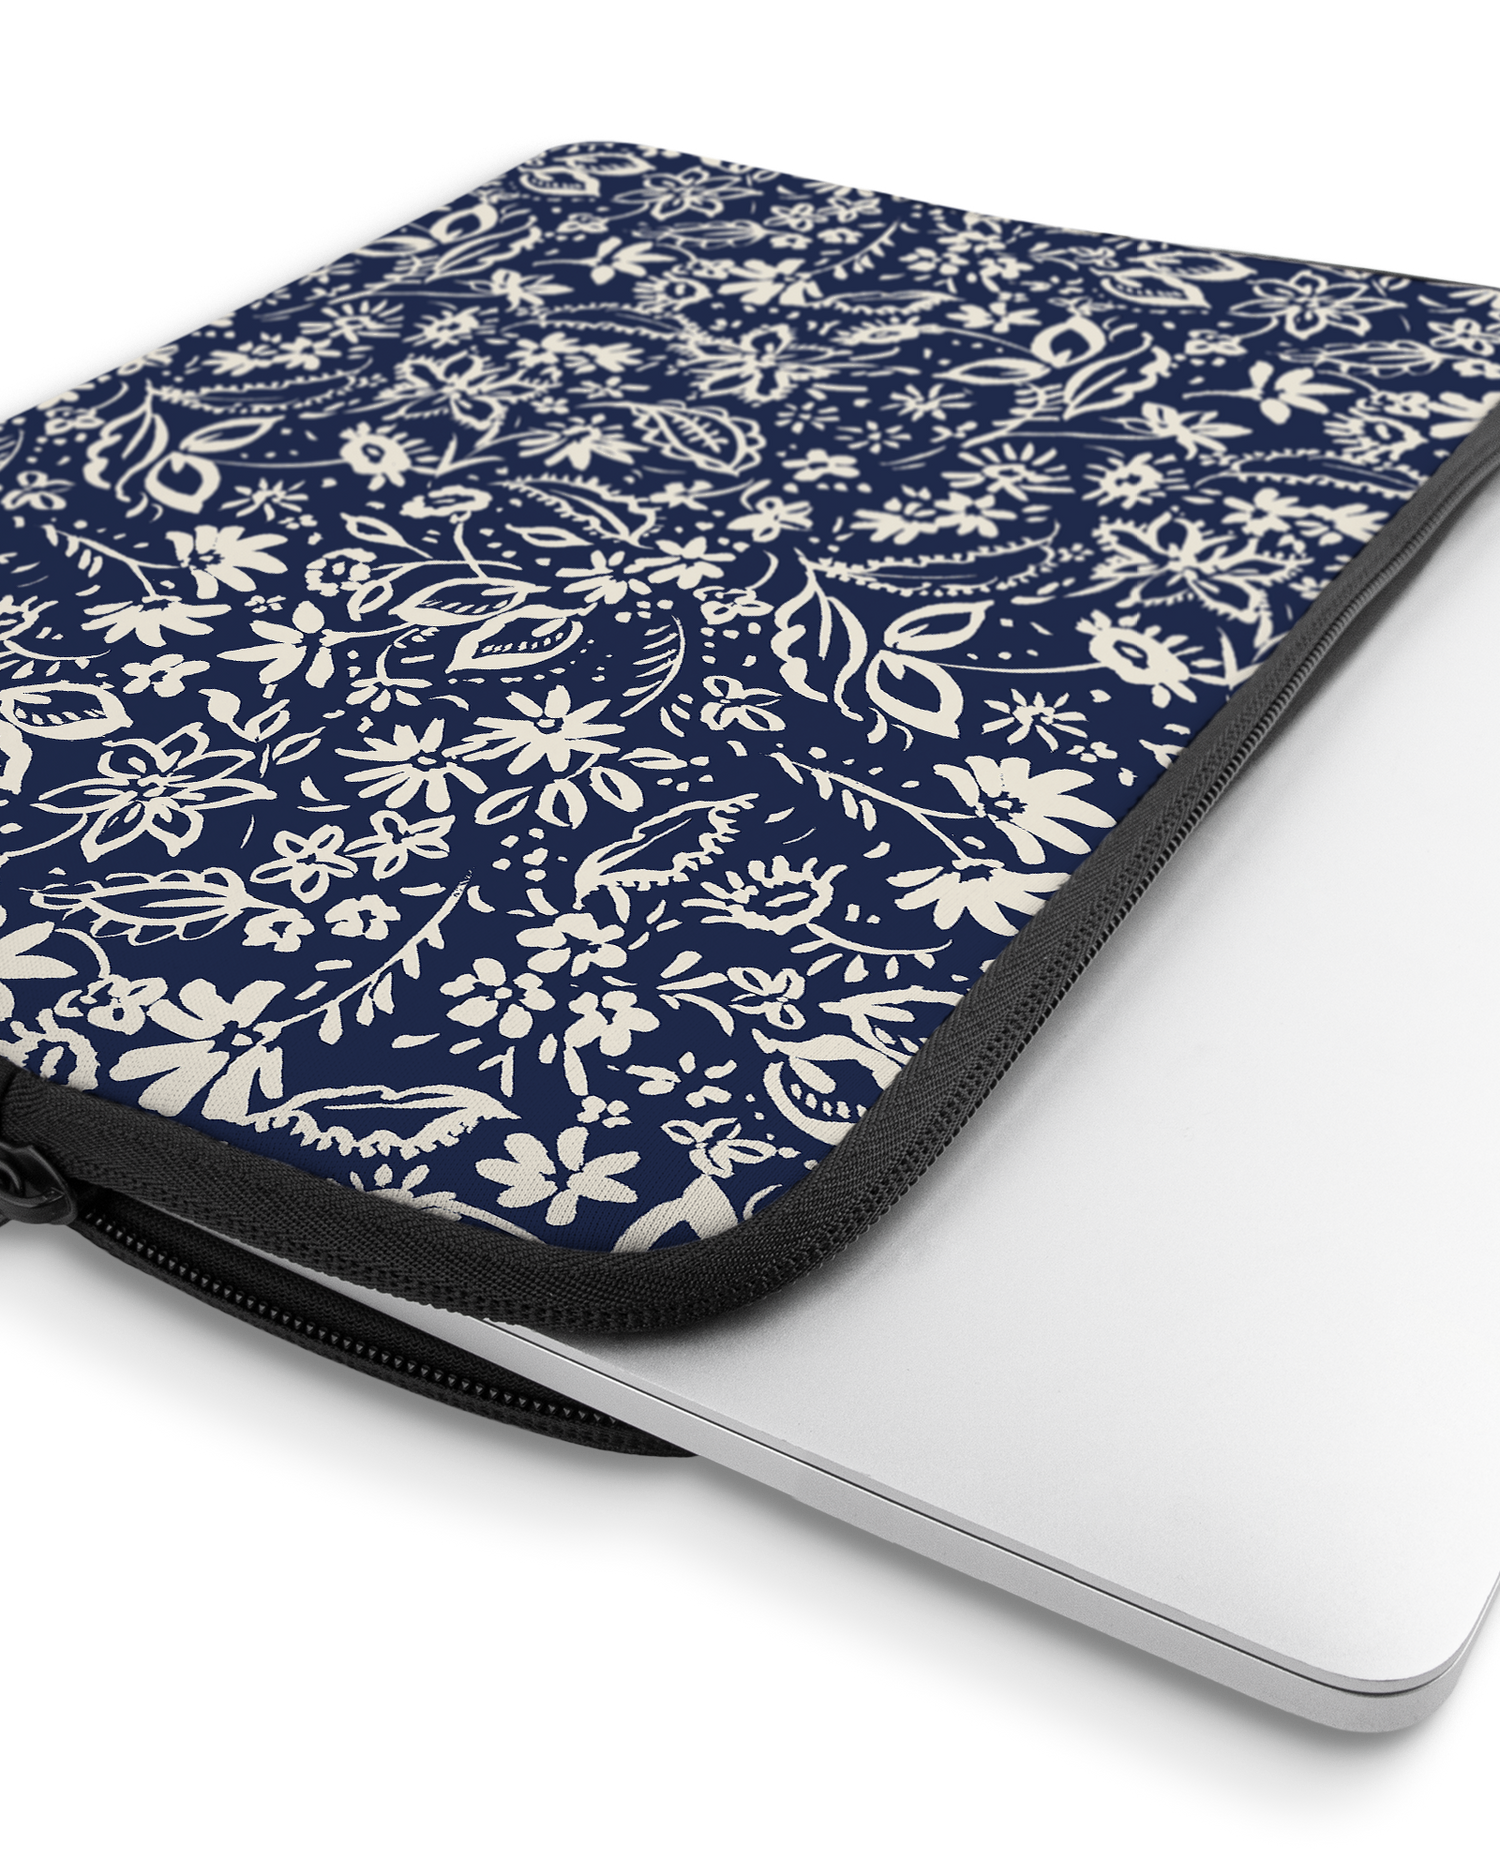 Ditsy Blue Paisley Laptop Case 13 inch with device inside